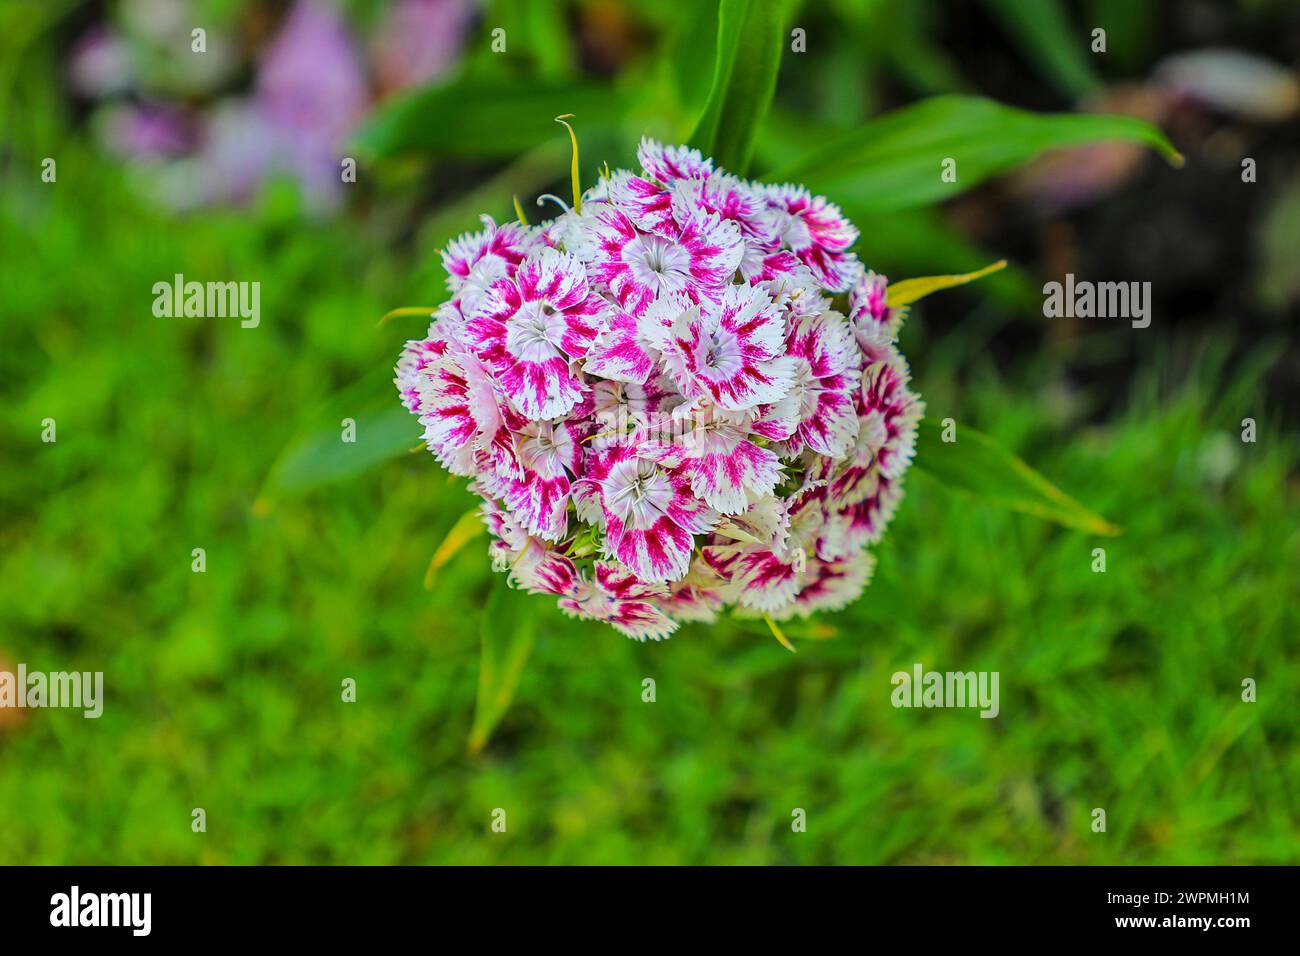 A close up shot of the pink and white flower head of a Sweet William (Dianthus barbatus) plant, England, UK Stock Photo